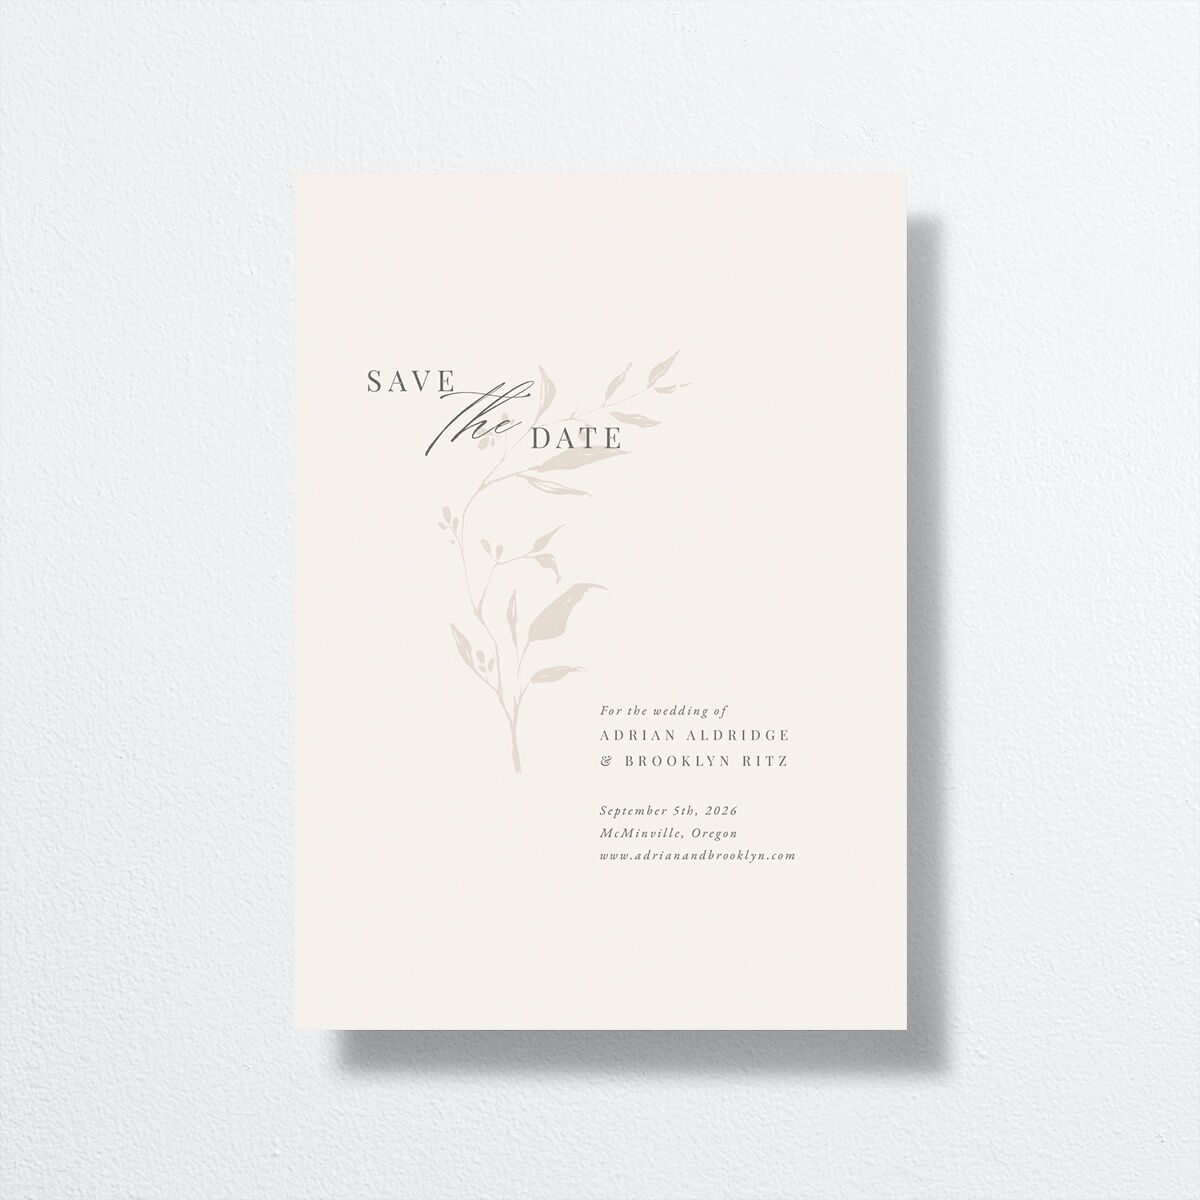 Rustic Minimal Save The Date Cards front in cream